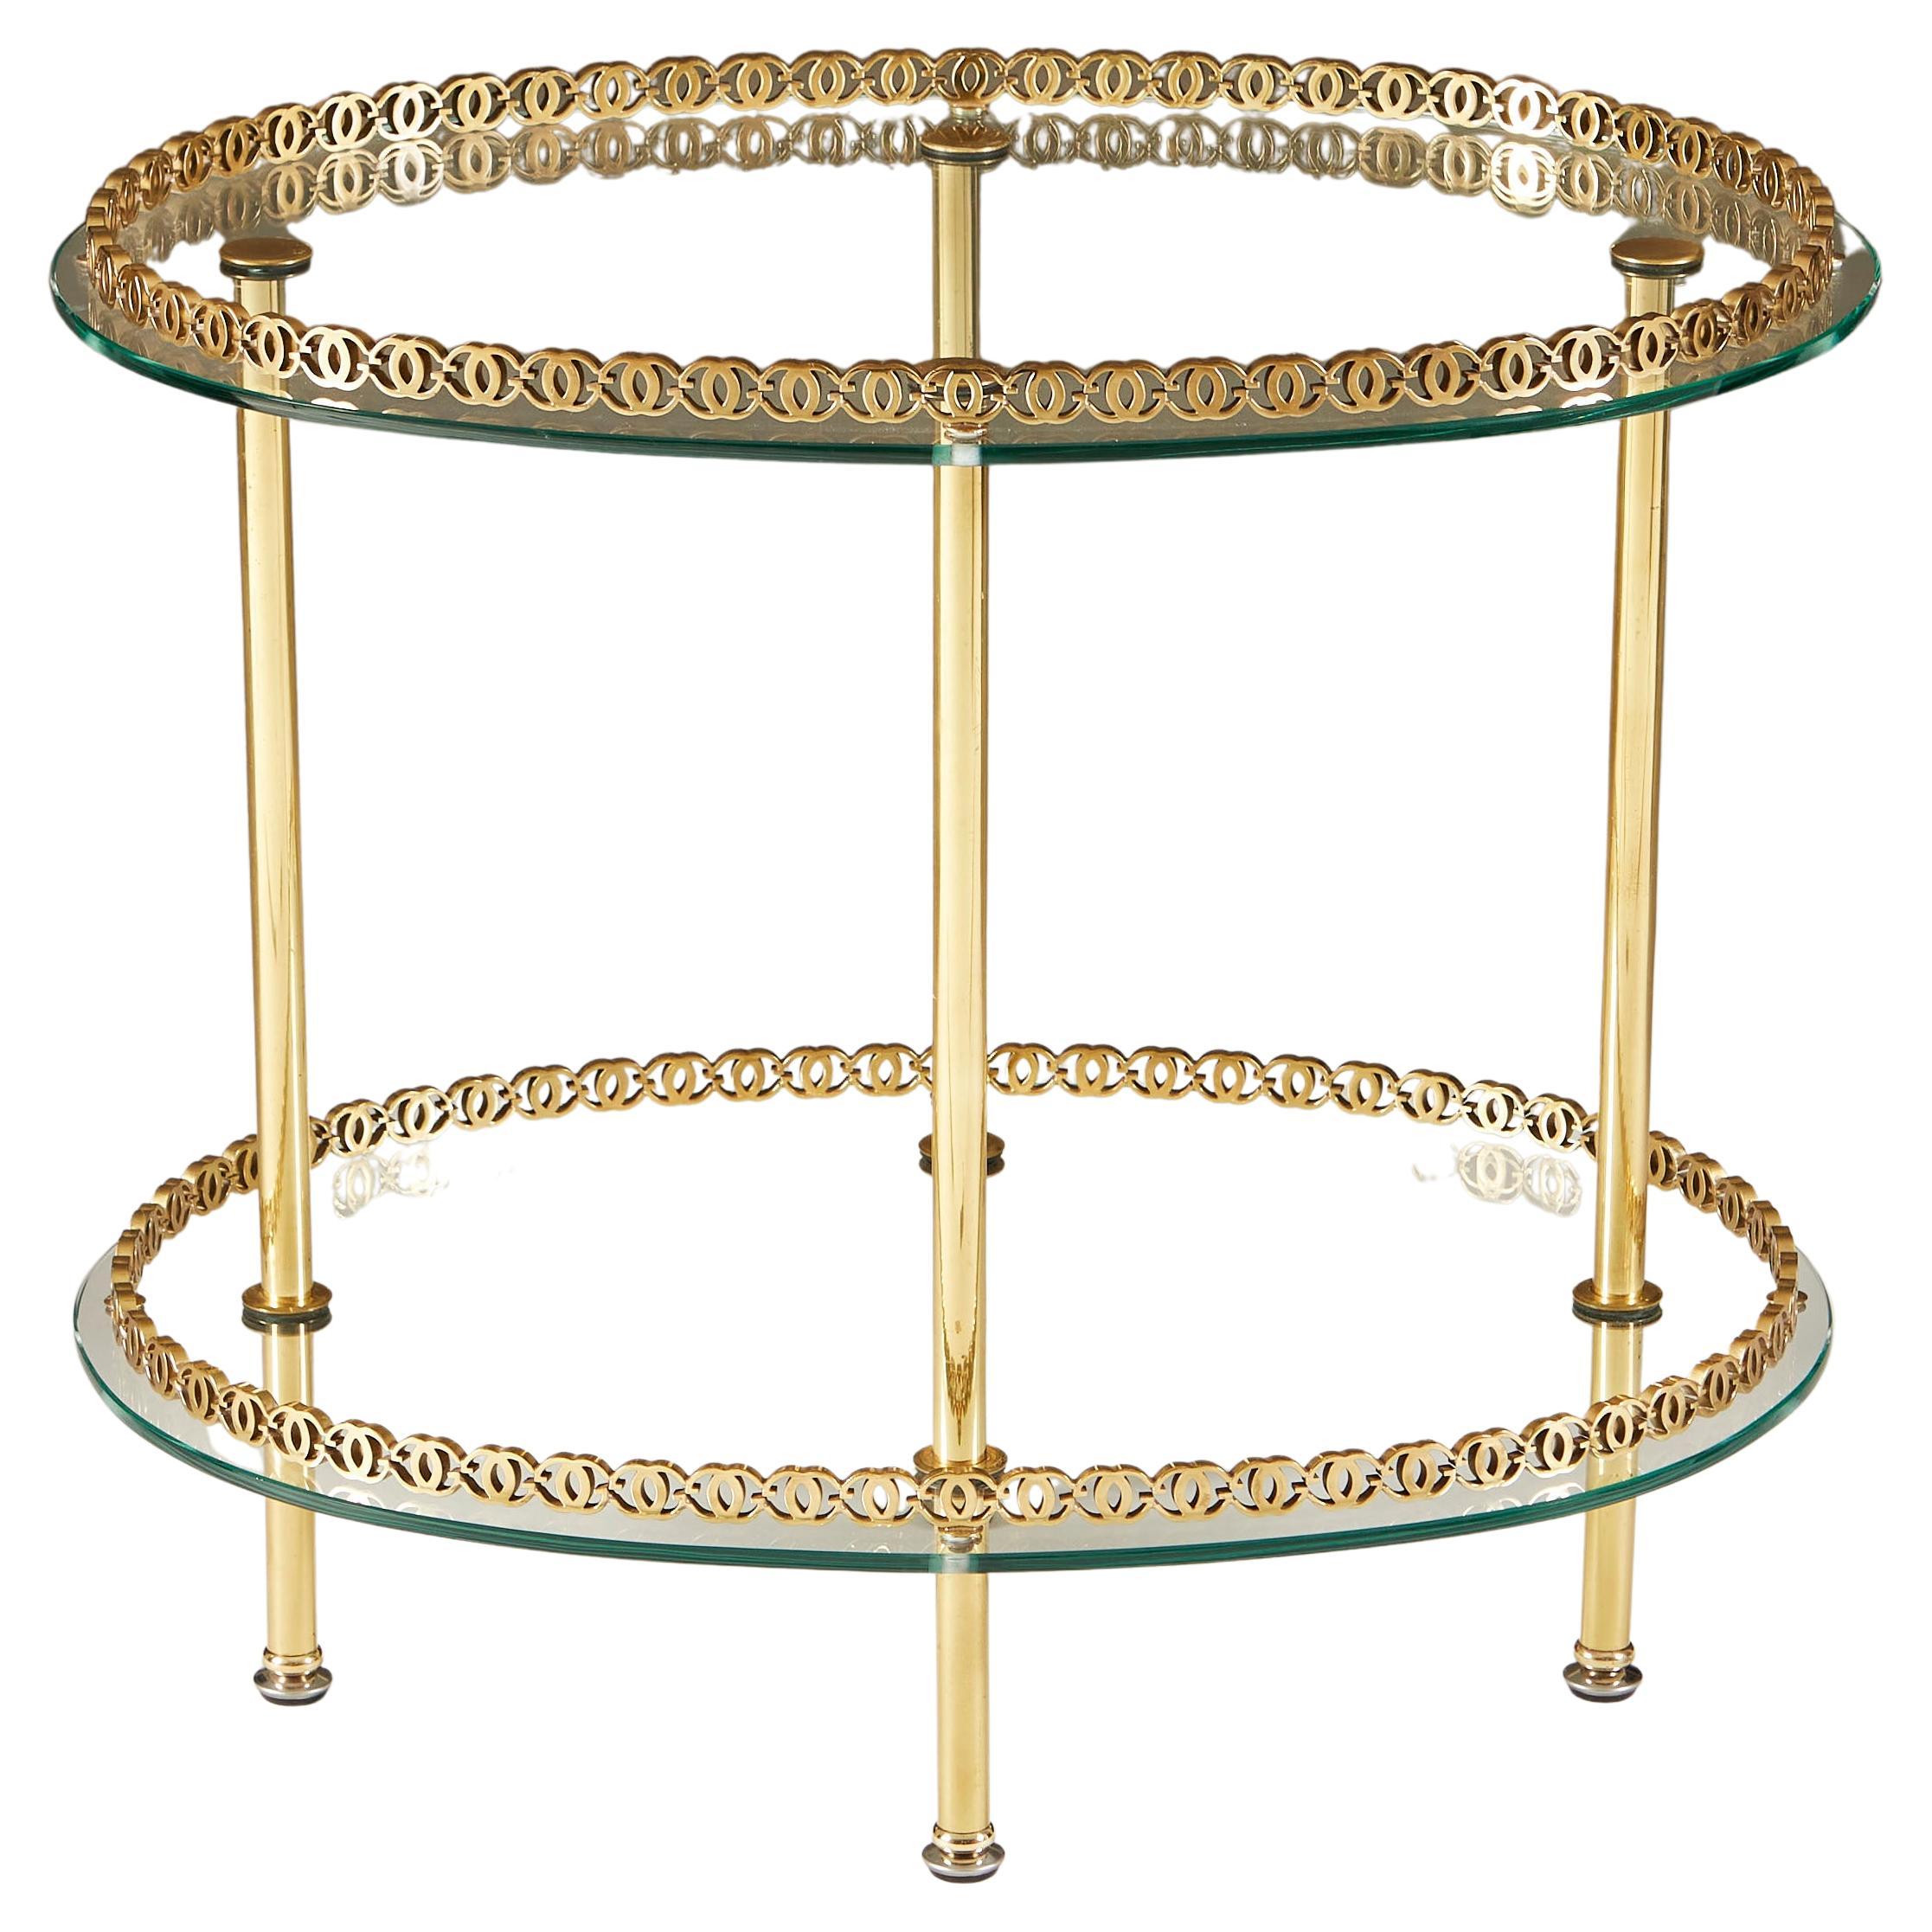 1950s Italian Brass and Glass Oval Table